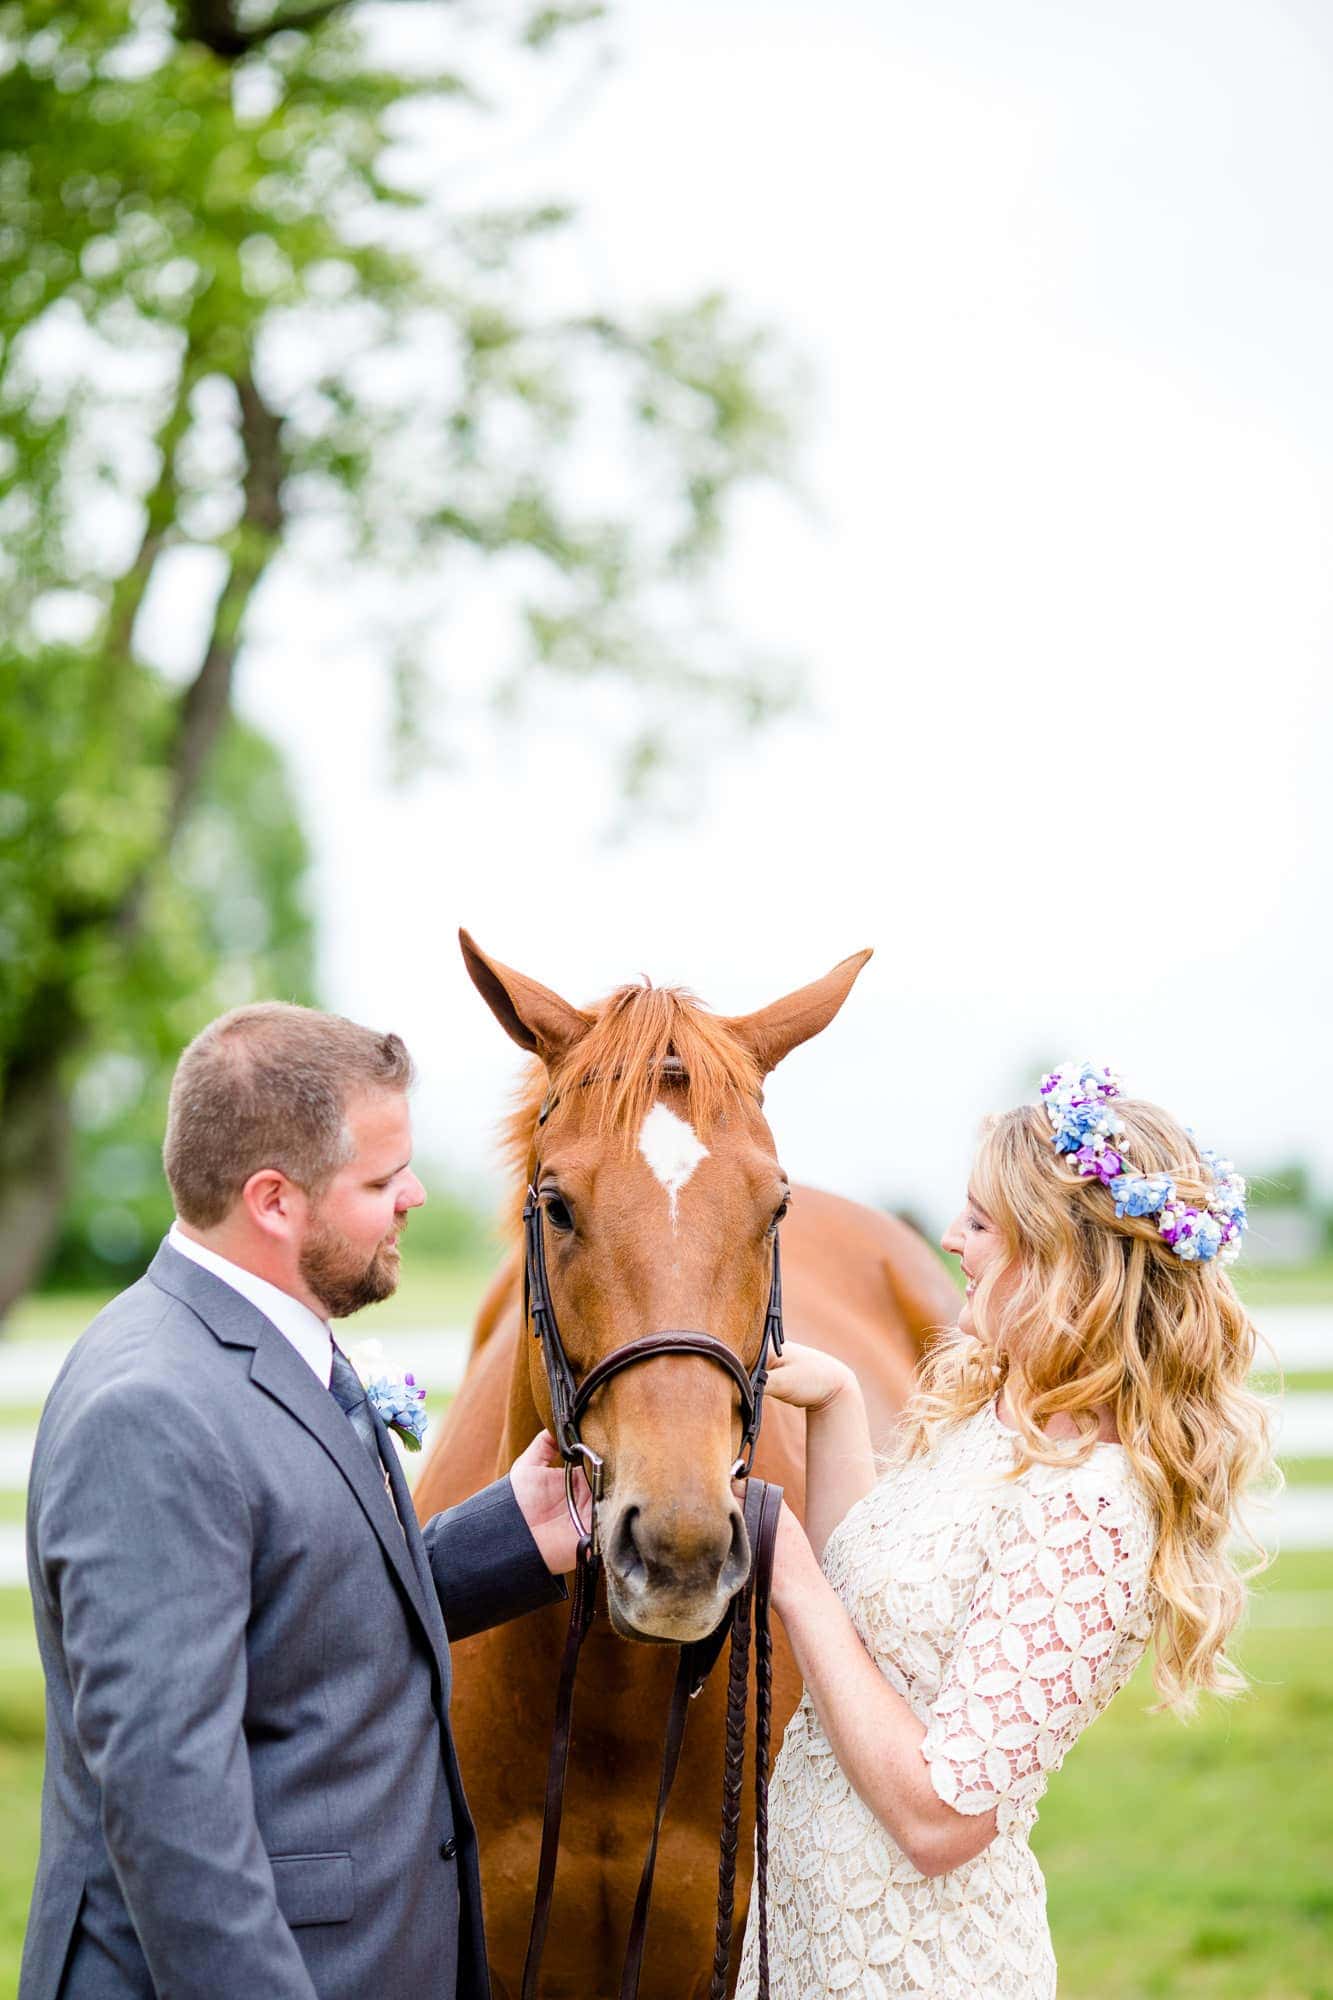 Pennsylvania groom and bride in a flower crown do portraits with a brown horse